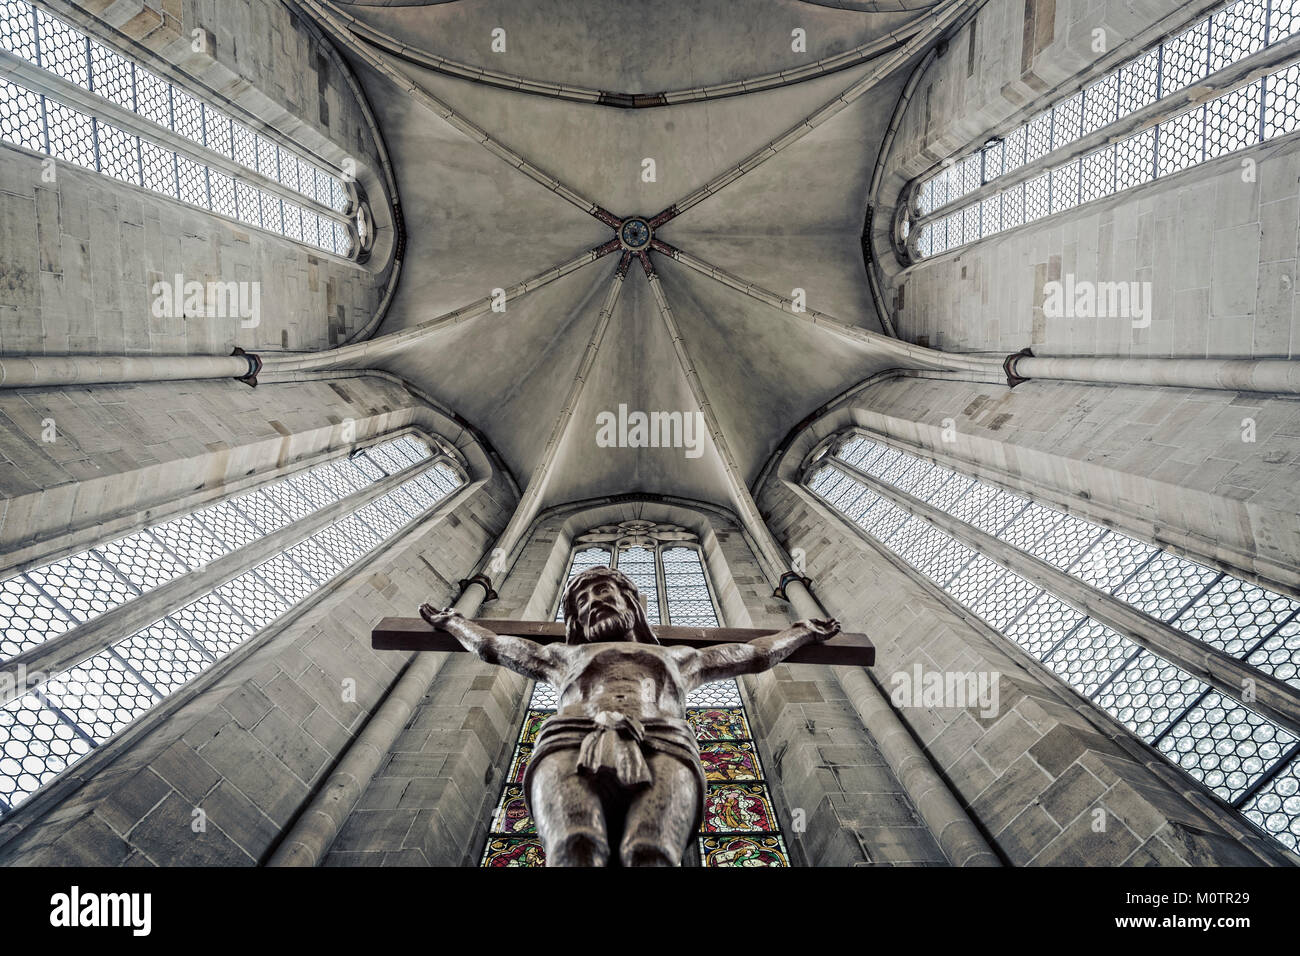 Bottom to top perspective of an franciscan church dome in Esslingen,Germany. The foreground shows a jesus with cross. Stock Photo